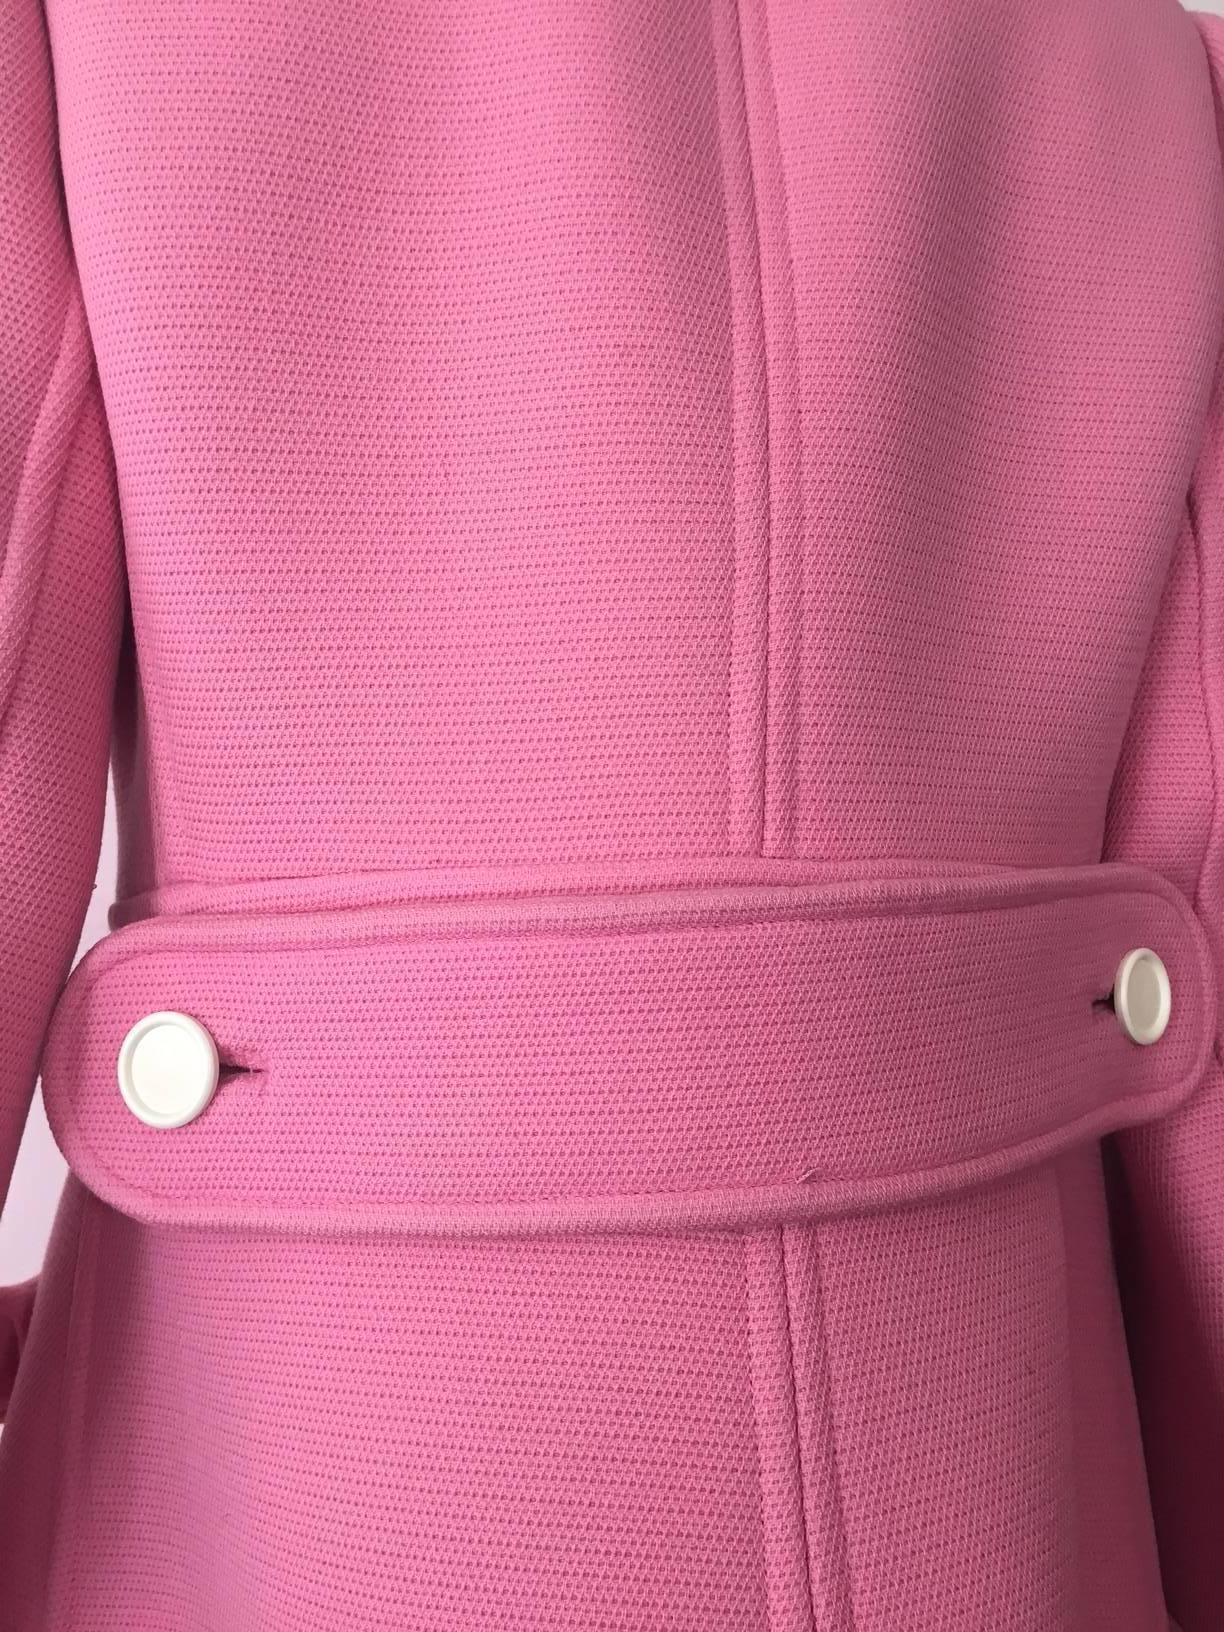 1960s Courreges Pink Wool Mod Coat with White Buttons 1